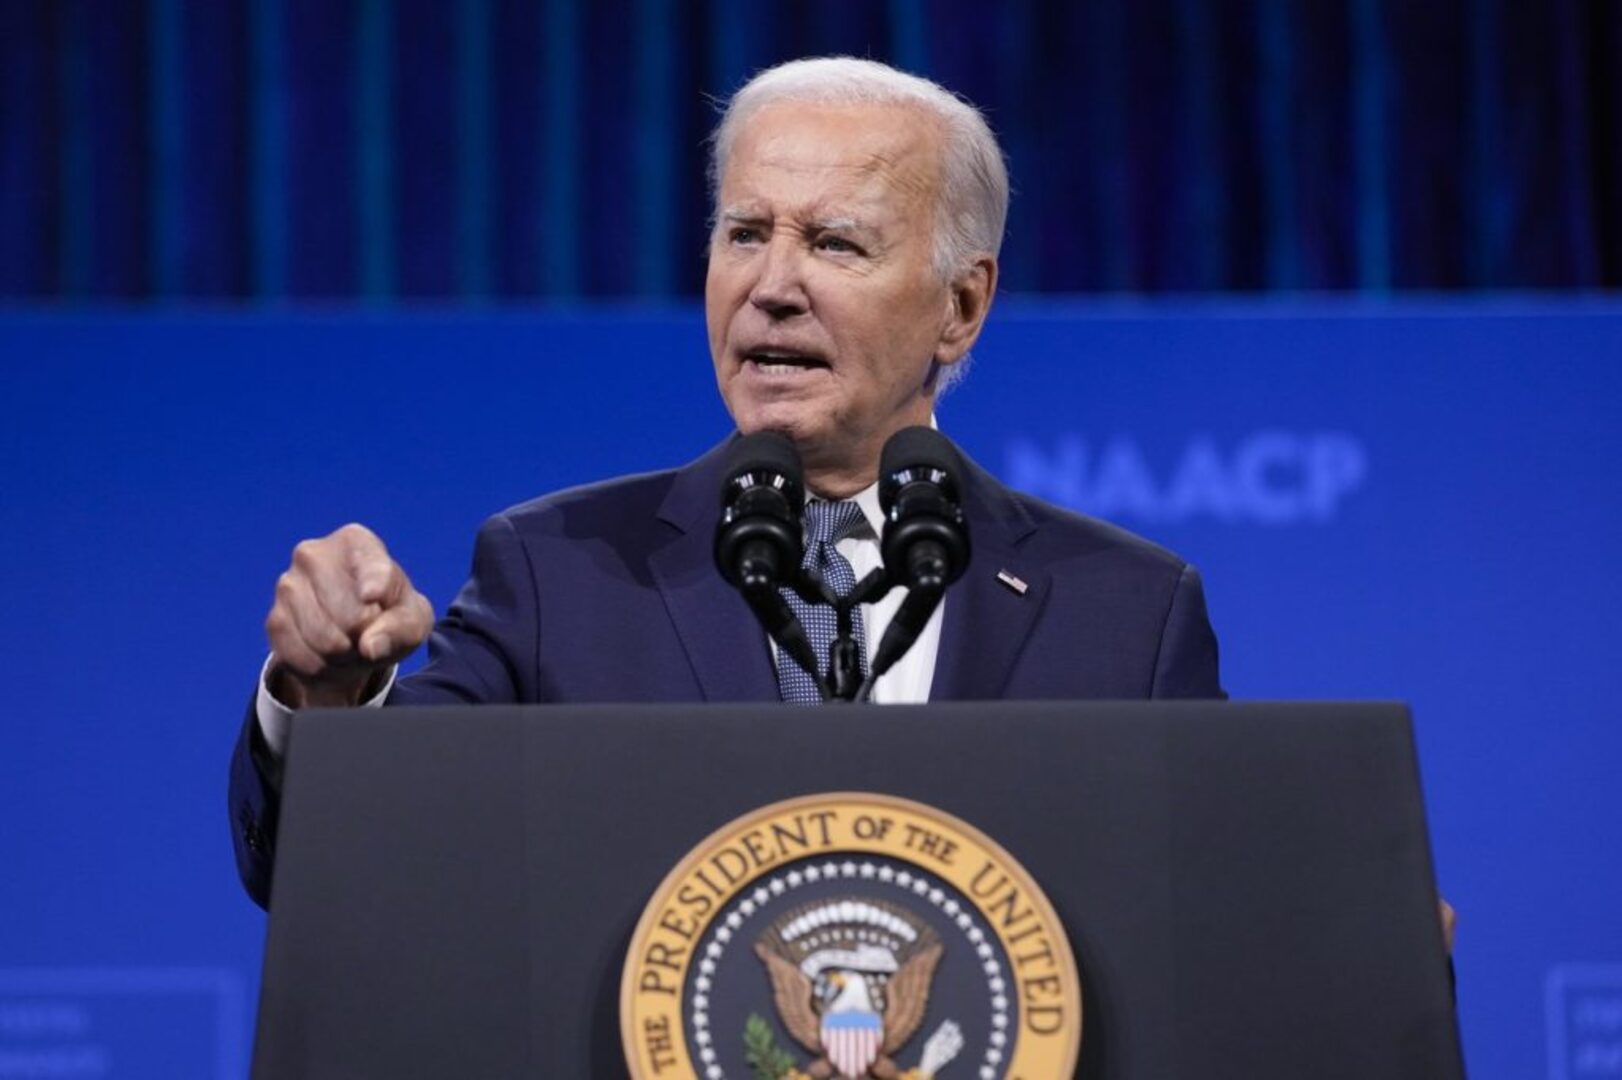 What will Biden say in his Oval Office address?